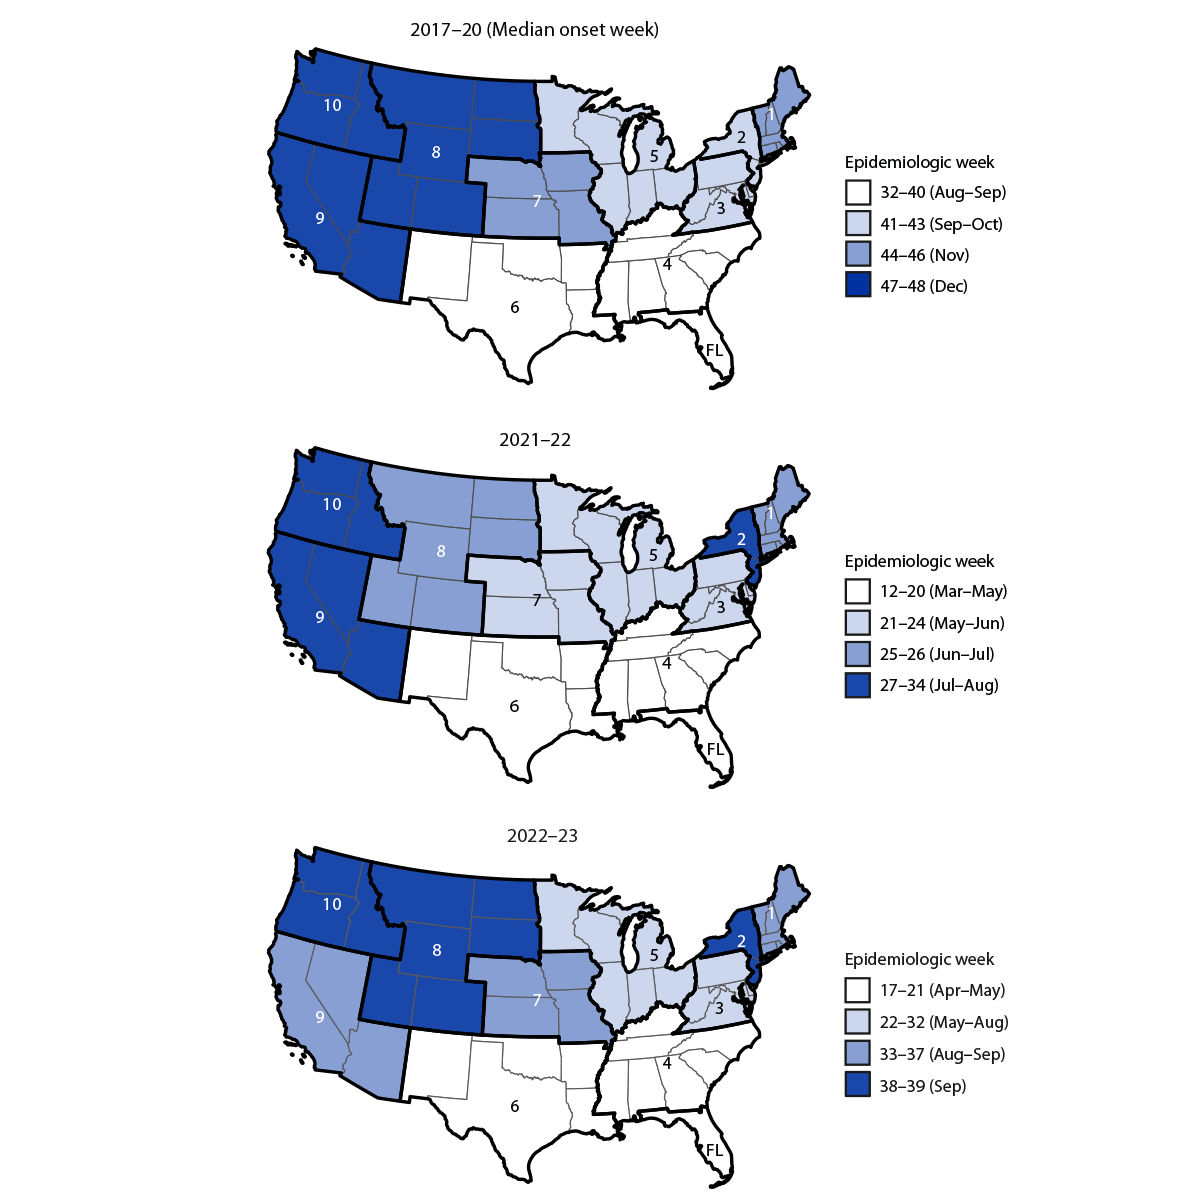 The figure is a set of three maps showing respiratory syncytial virus epidemic onsets, by U.S. Department of Health and Human Services Regions 1–10 and in Florida, in the United States, during July 2017–February 2023 according to the National Respiratory and Enteric Virus Surveillance System.